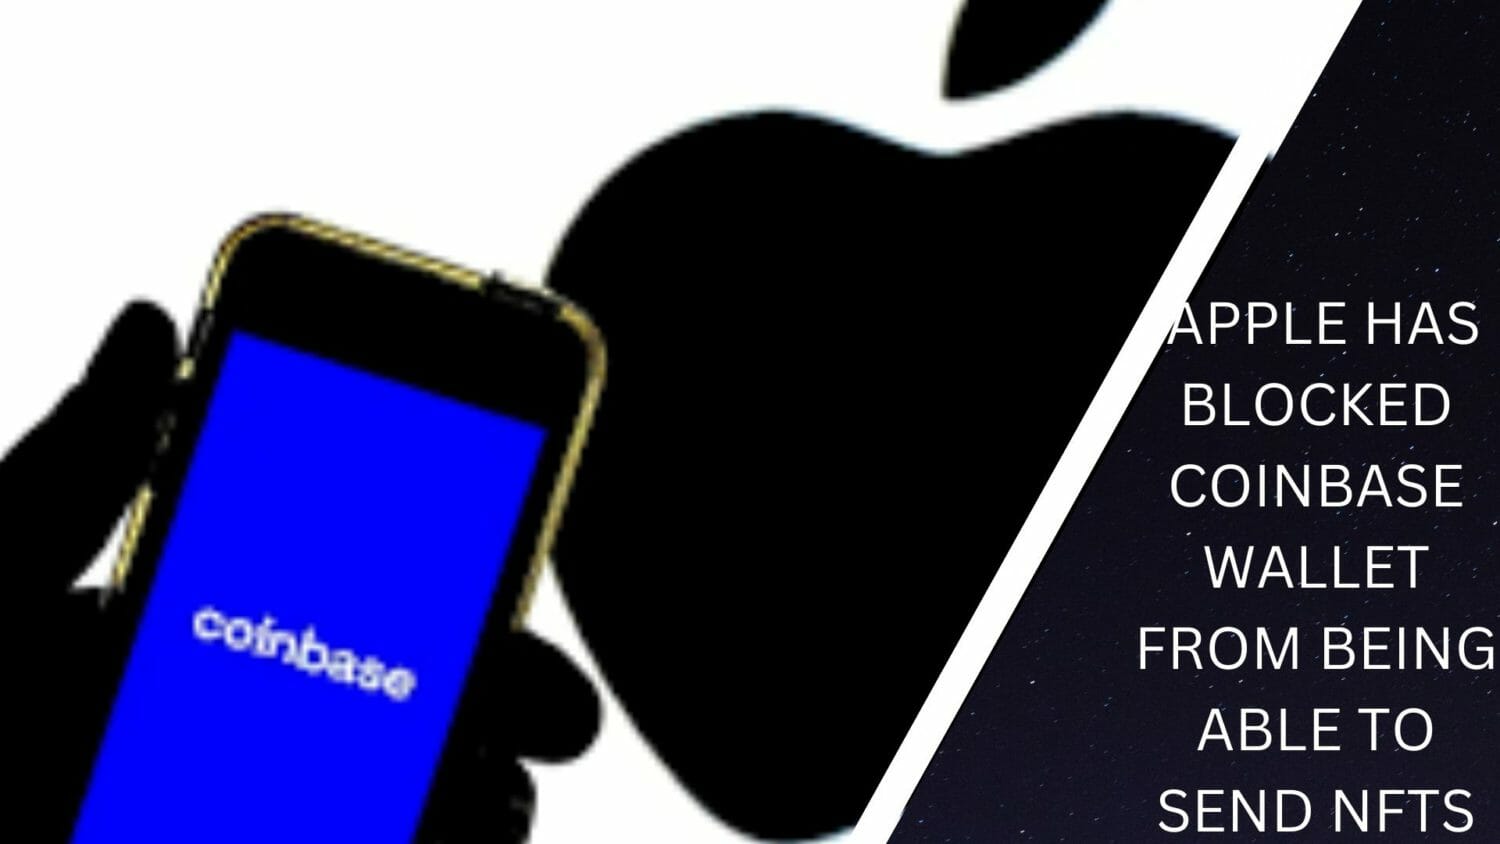 Apple Has Blocked Coinbase Wallet From Being Able To Send Nfts